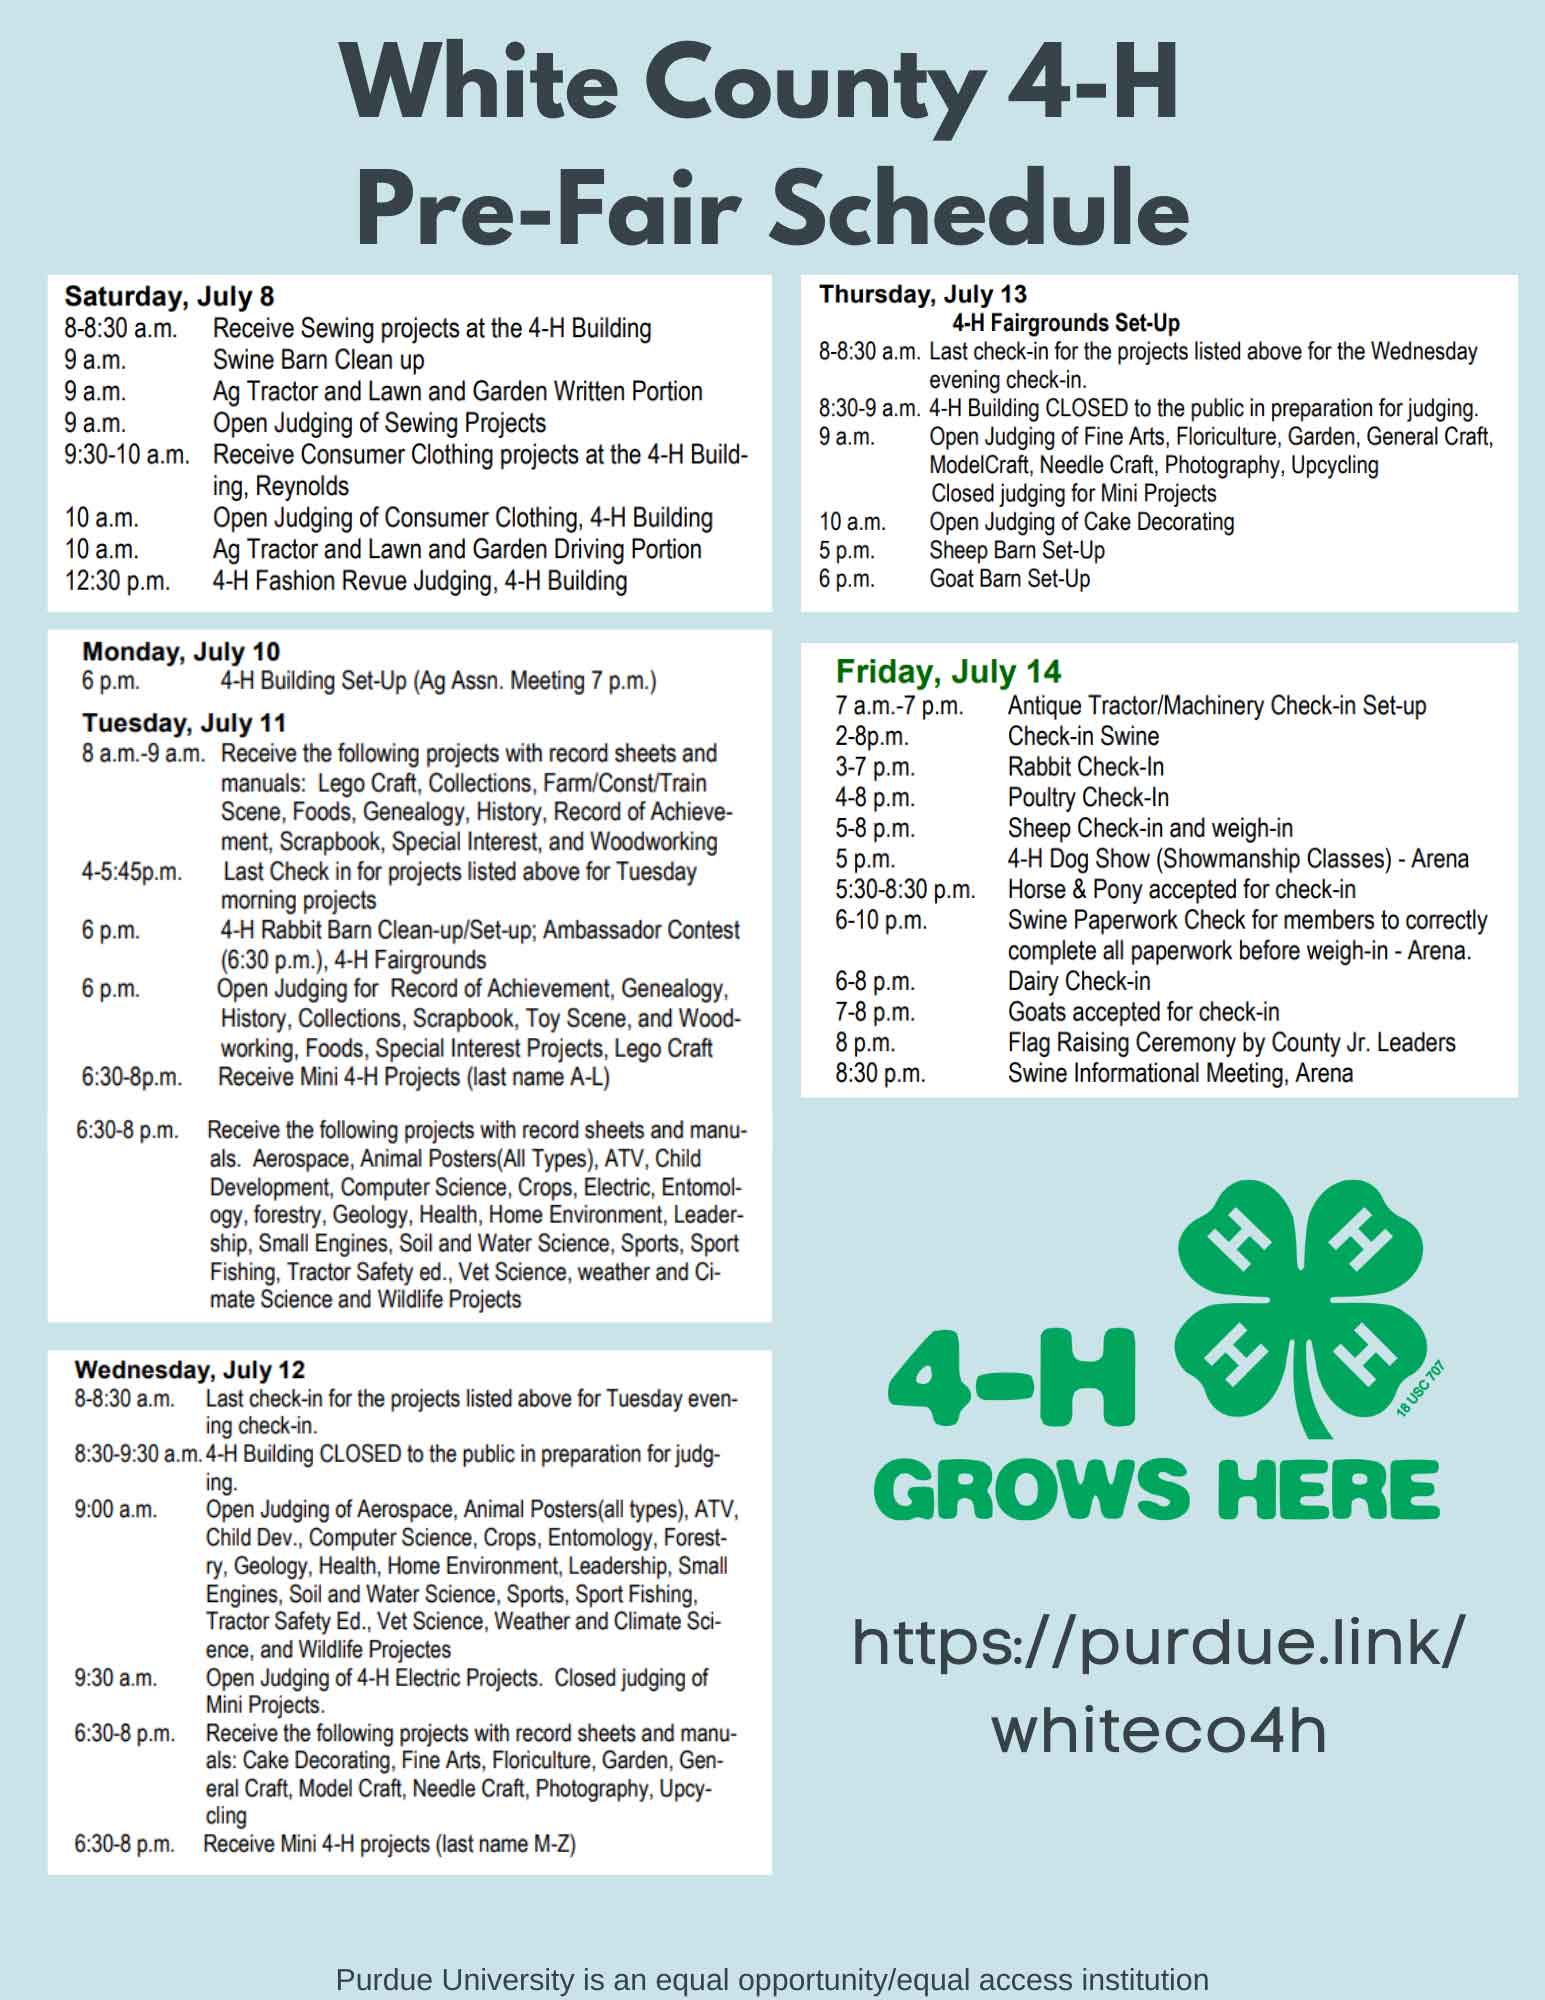 white-county-4-h-pre-fair-schedule-3.png